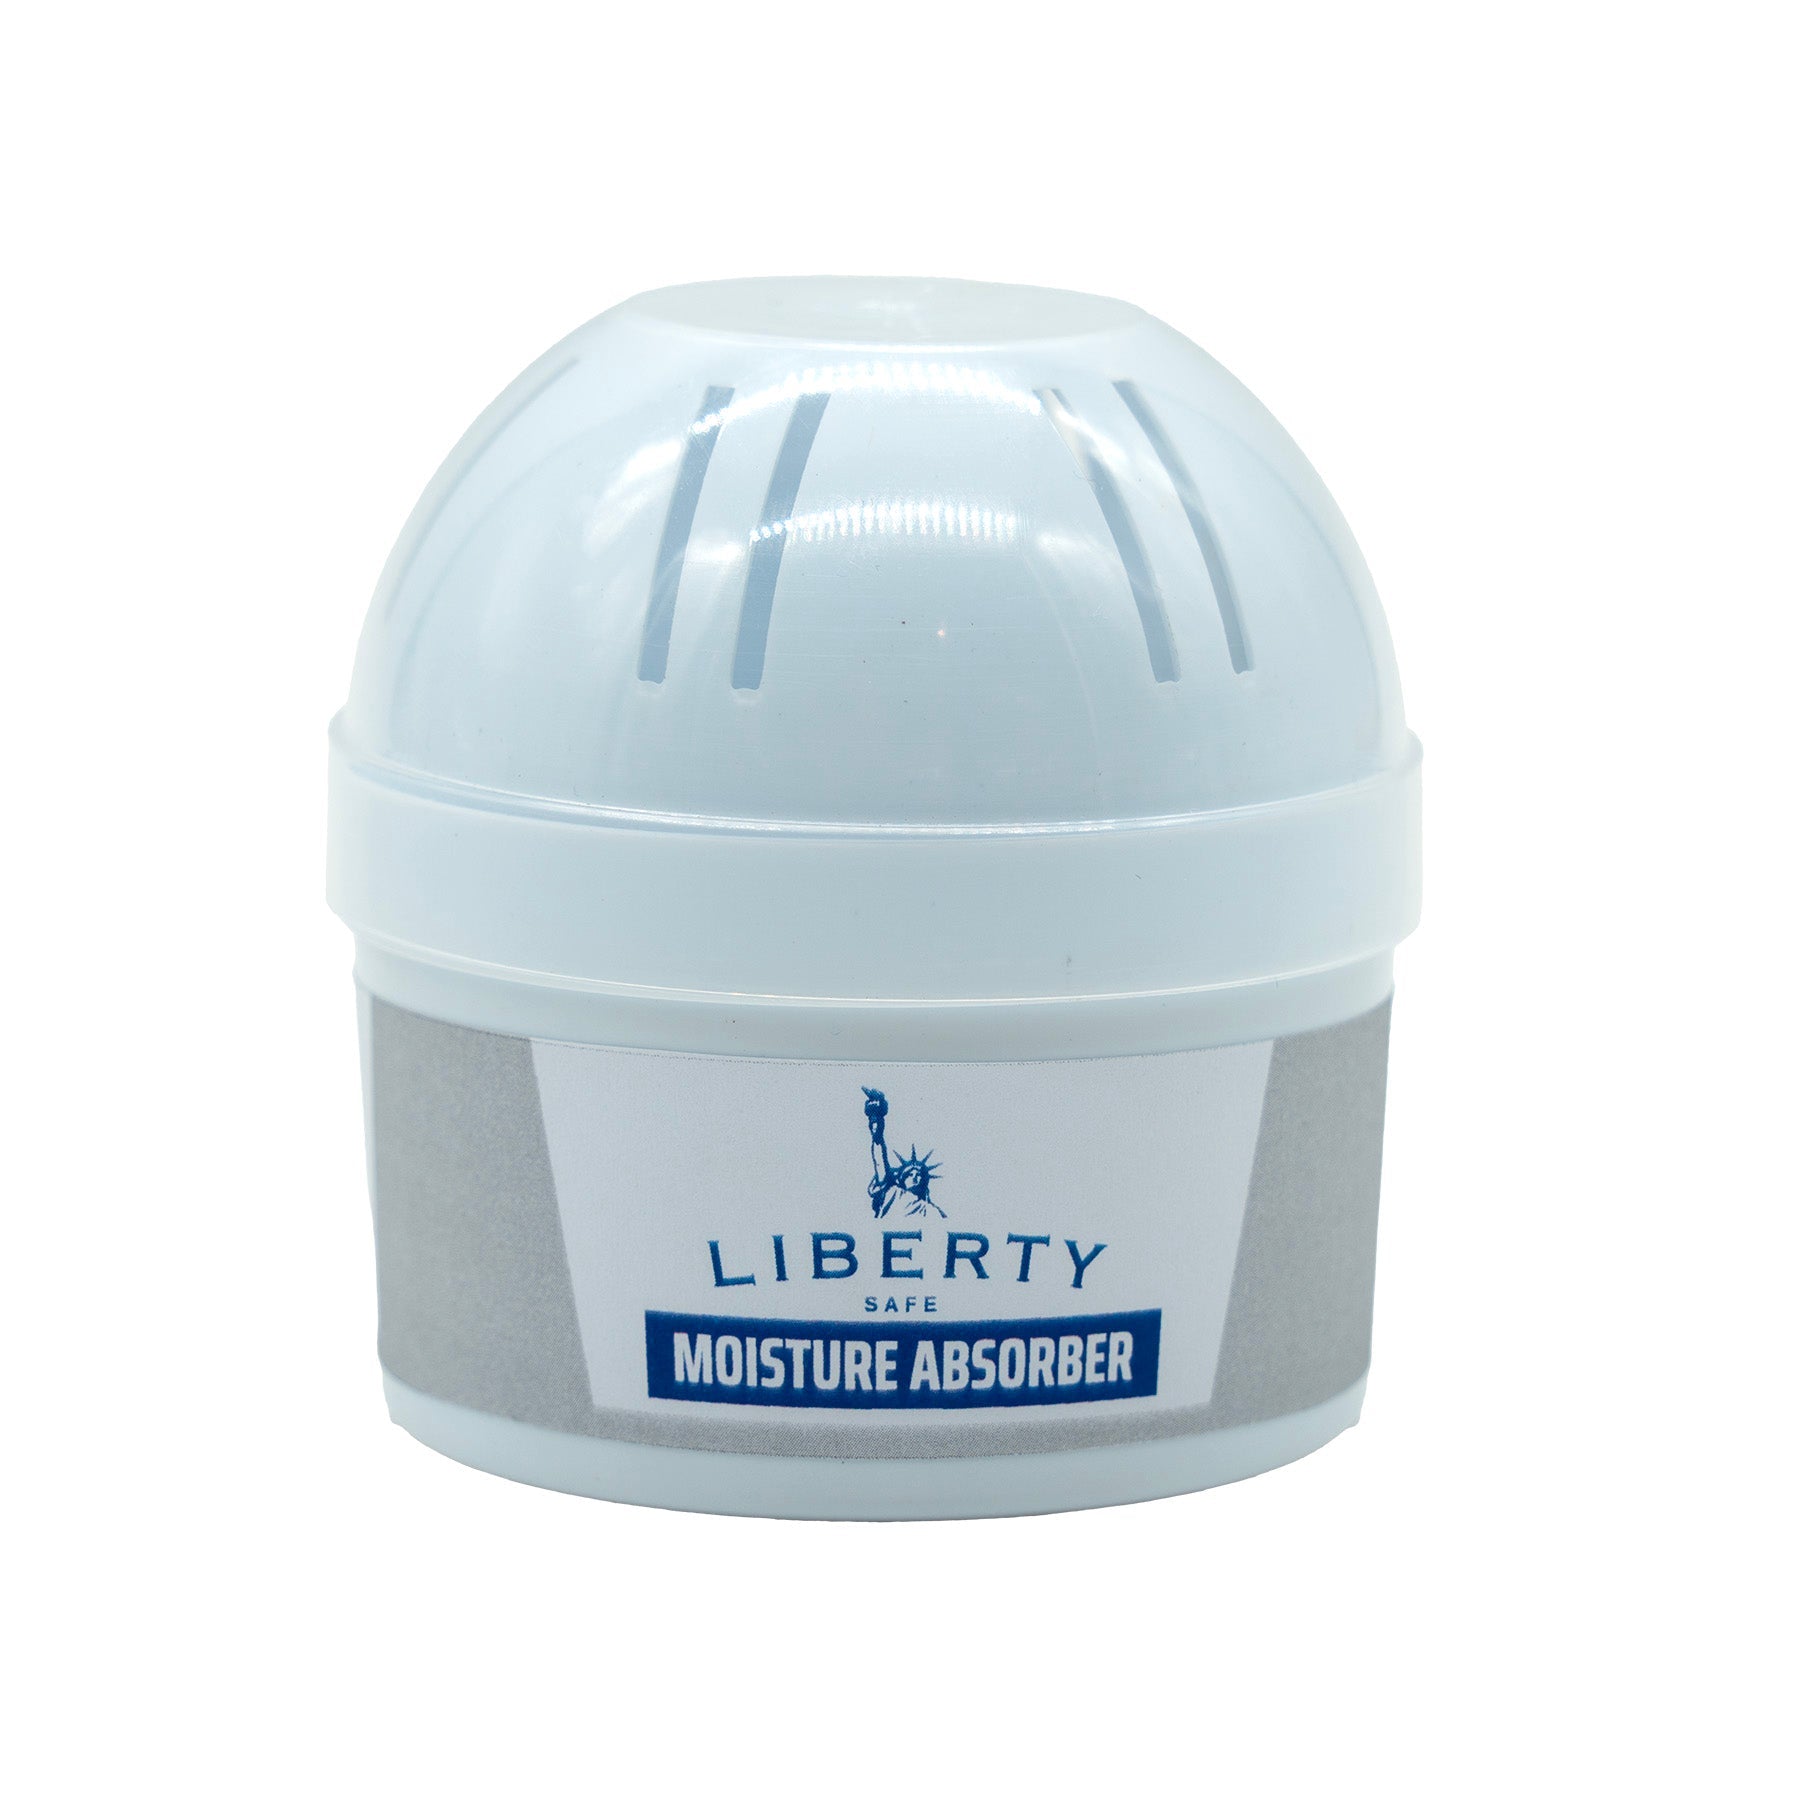 HumyDry Moisture Absorber 2.6 Ounce Package